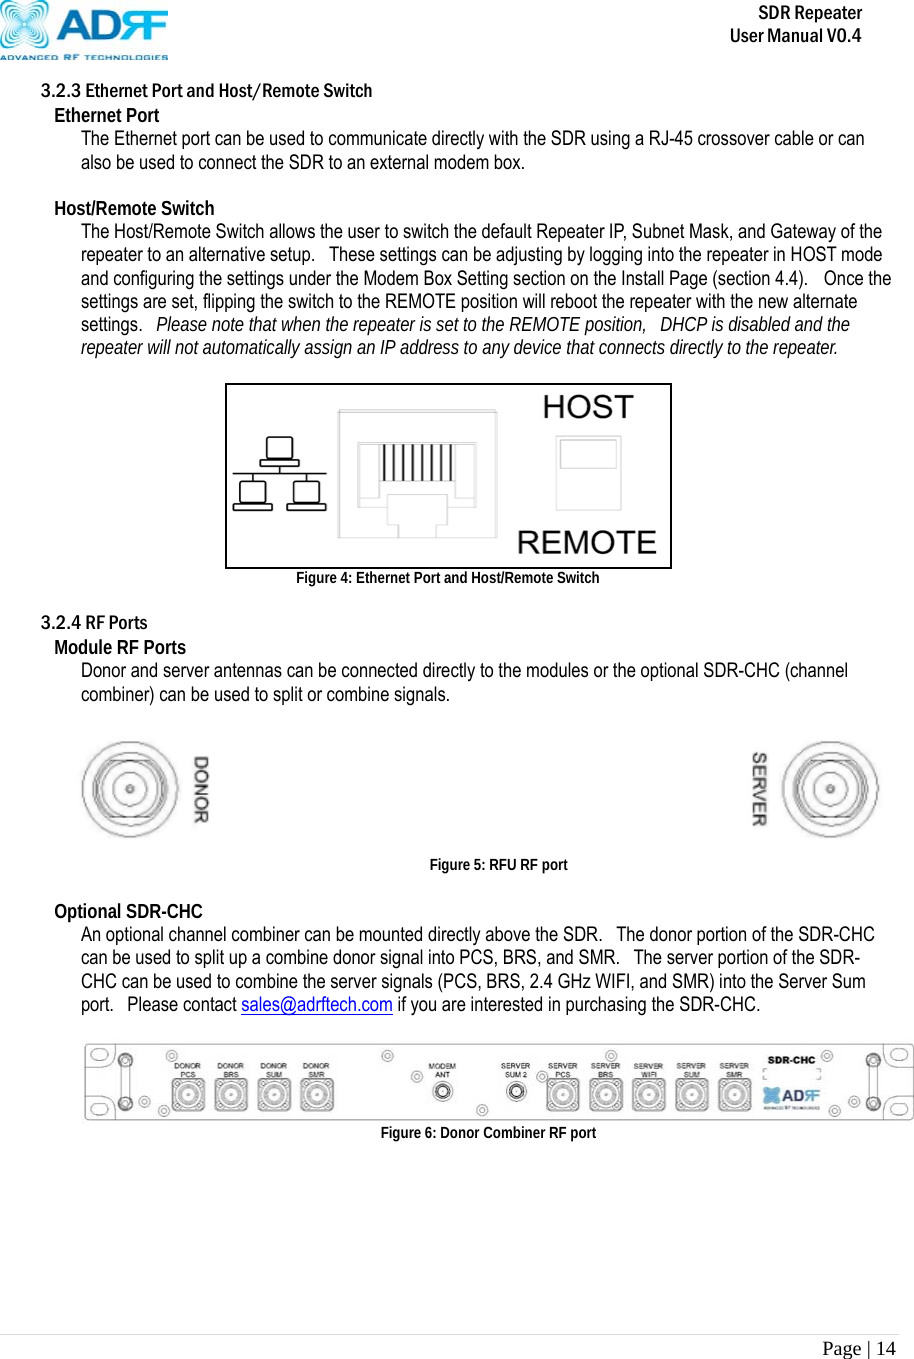       SDR Repeater   User Manual V0.4 Page | 14   3.2.3 Ethernet Port and Host/Remote Switch Ethernet Port The Ethernet port can be used to communicate directly with the SDR using a RJ-45 crossover cable or can also be used to connect the SDR to an external modem box.  Host/Remote Switch The Host/Remote Switch allows the user to switch the default Repeater IP, Subnet Mask, and Gateway of the repeater to an alternative setup.   These settings can be adjusting by logging into the repeater in HOST mode and configuring the settings under the Modem Box Setting section on the Install Page (section 4.4).   Once the settings are set, flipping the switch to the REMOTE position will reboot the repeater with the new alternate settings.  Please note that when the repeater is set to the REMOTE position,  DHCP is disabled and the repeater will not automatically assign an IP address to any device that connects directly to the repeater.   Figure 4: Ethernet Port and Host/Remote Switch  3.2.4 RF Ports Module RF Ports Donor and server antennas can be connected directly to the modules or the optional SDR-CHC (channel combiner) can be used to split or combine signals.     Figure 5: RFU RF port  Optional SDR-CHC An optional channel combiner can be mounted directly above the SDR.    The donor portion of the SDR-CHC can be used to split up a combine donor signal into PCS, BRS, and SMR.   The server portion of the SDR-CHC can be used to combine the server signals (PCS, BRS, 2.4 GHz WIFI, and SMR) into the Server Sum port.  Please contact sales@adrftech.com if you are interested in purchasing the SDR-CHC.   Figure 6: Donor Combiner RF port       